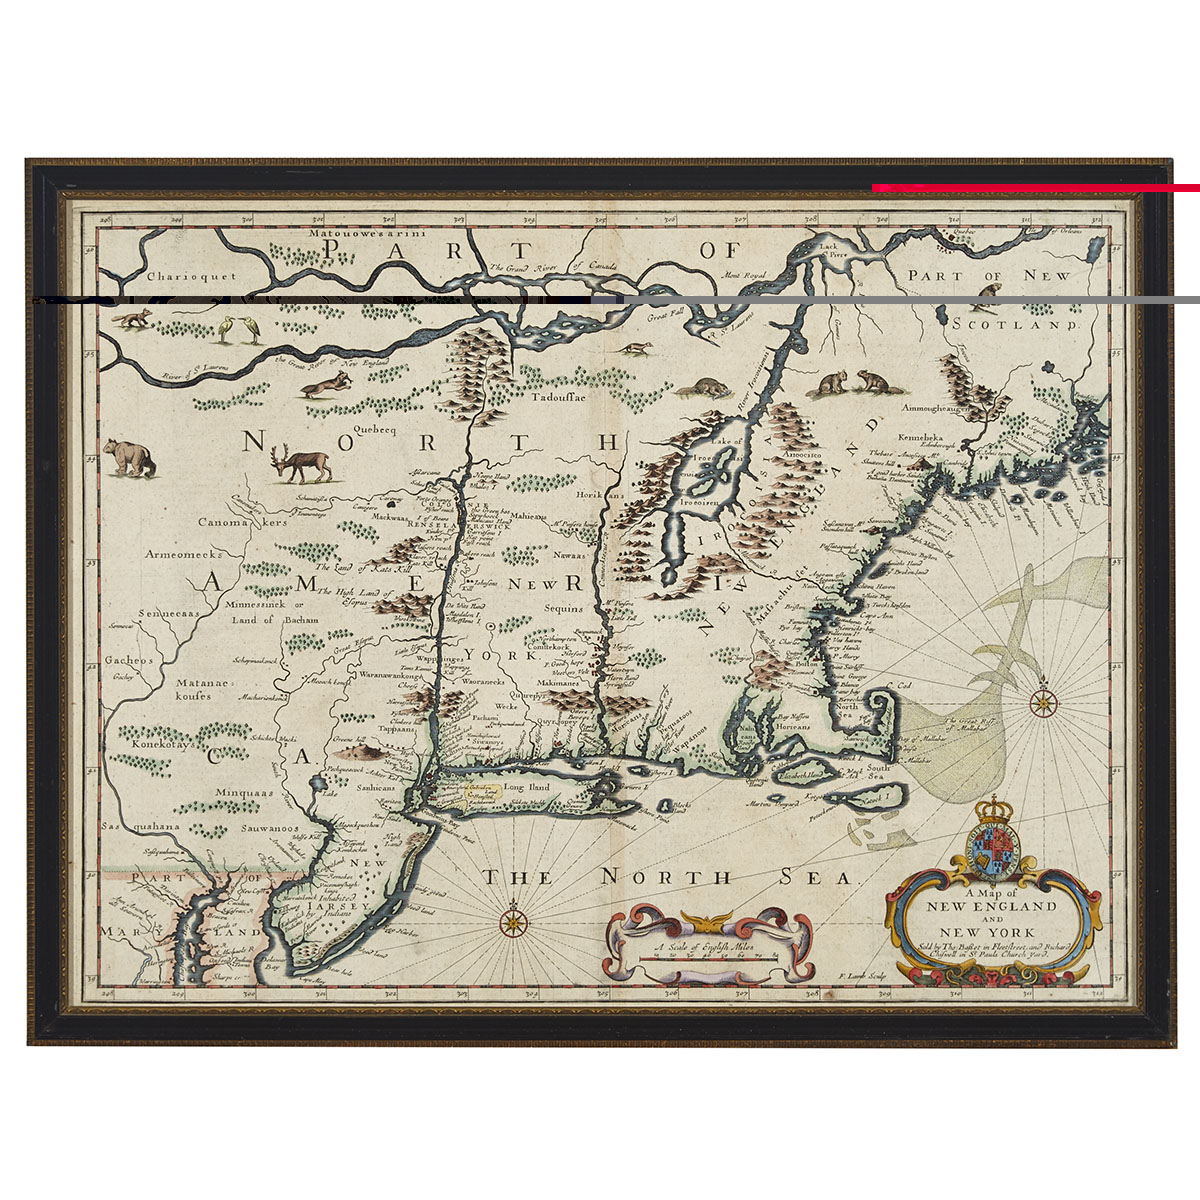 John Speed (1552-1629) A Map of New England and New York, 1676